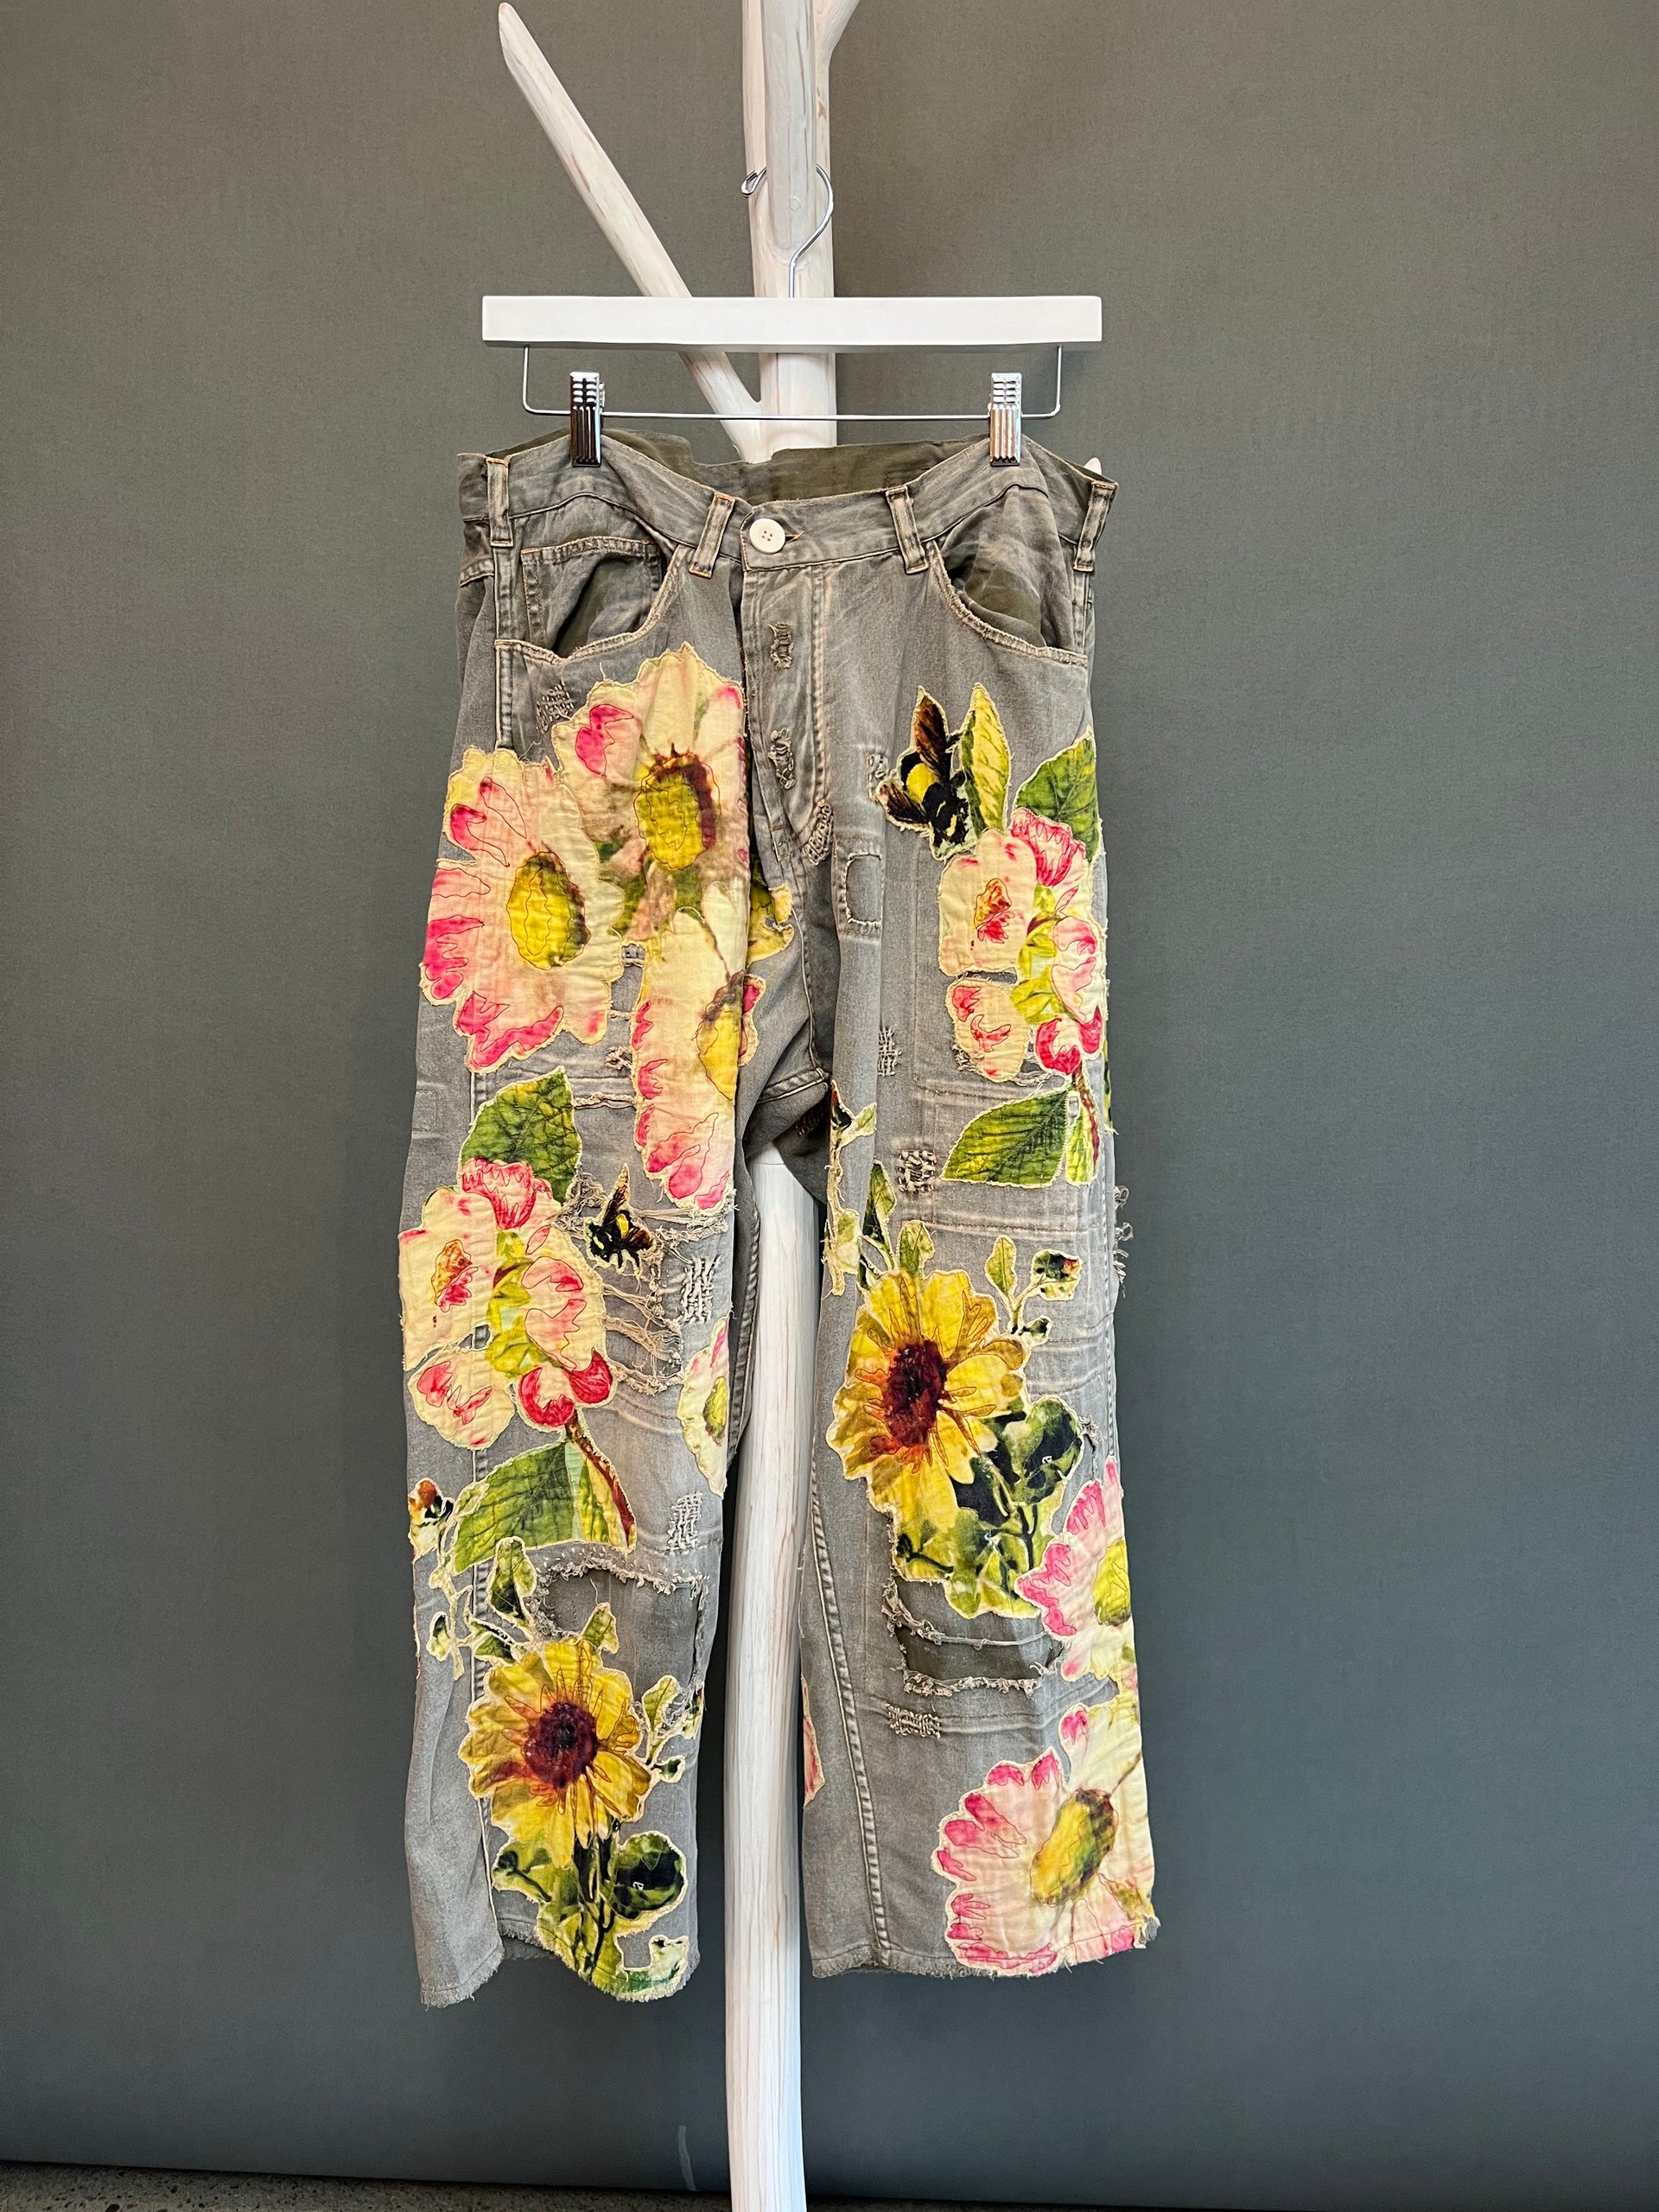 Magnolia Pearl Cotton Twill Miner Pants with Sunflower Applique, Daisies  and Bees in Ashbury Peace Pants 433 - The Walnut Tree Shop Magnolia Pearl  Cotton Twill Miner Pants with Sunflower Applique, Daisies